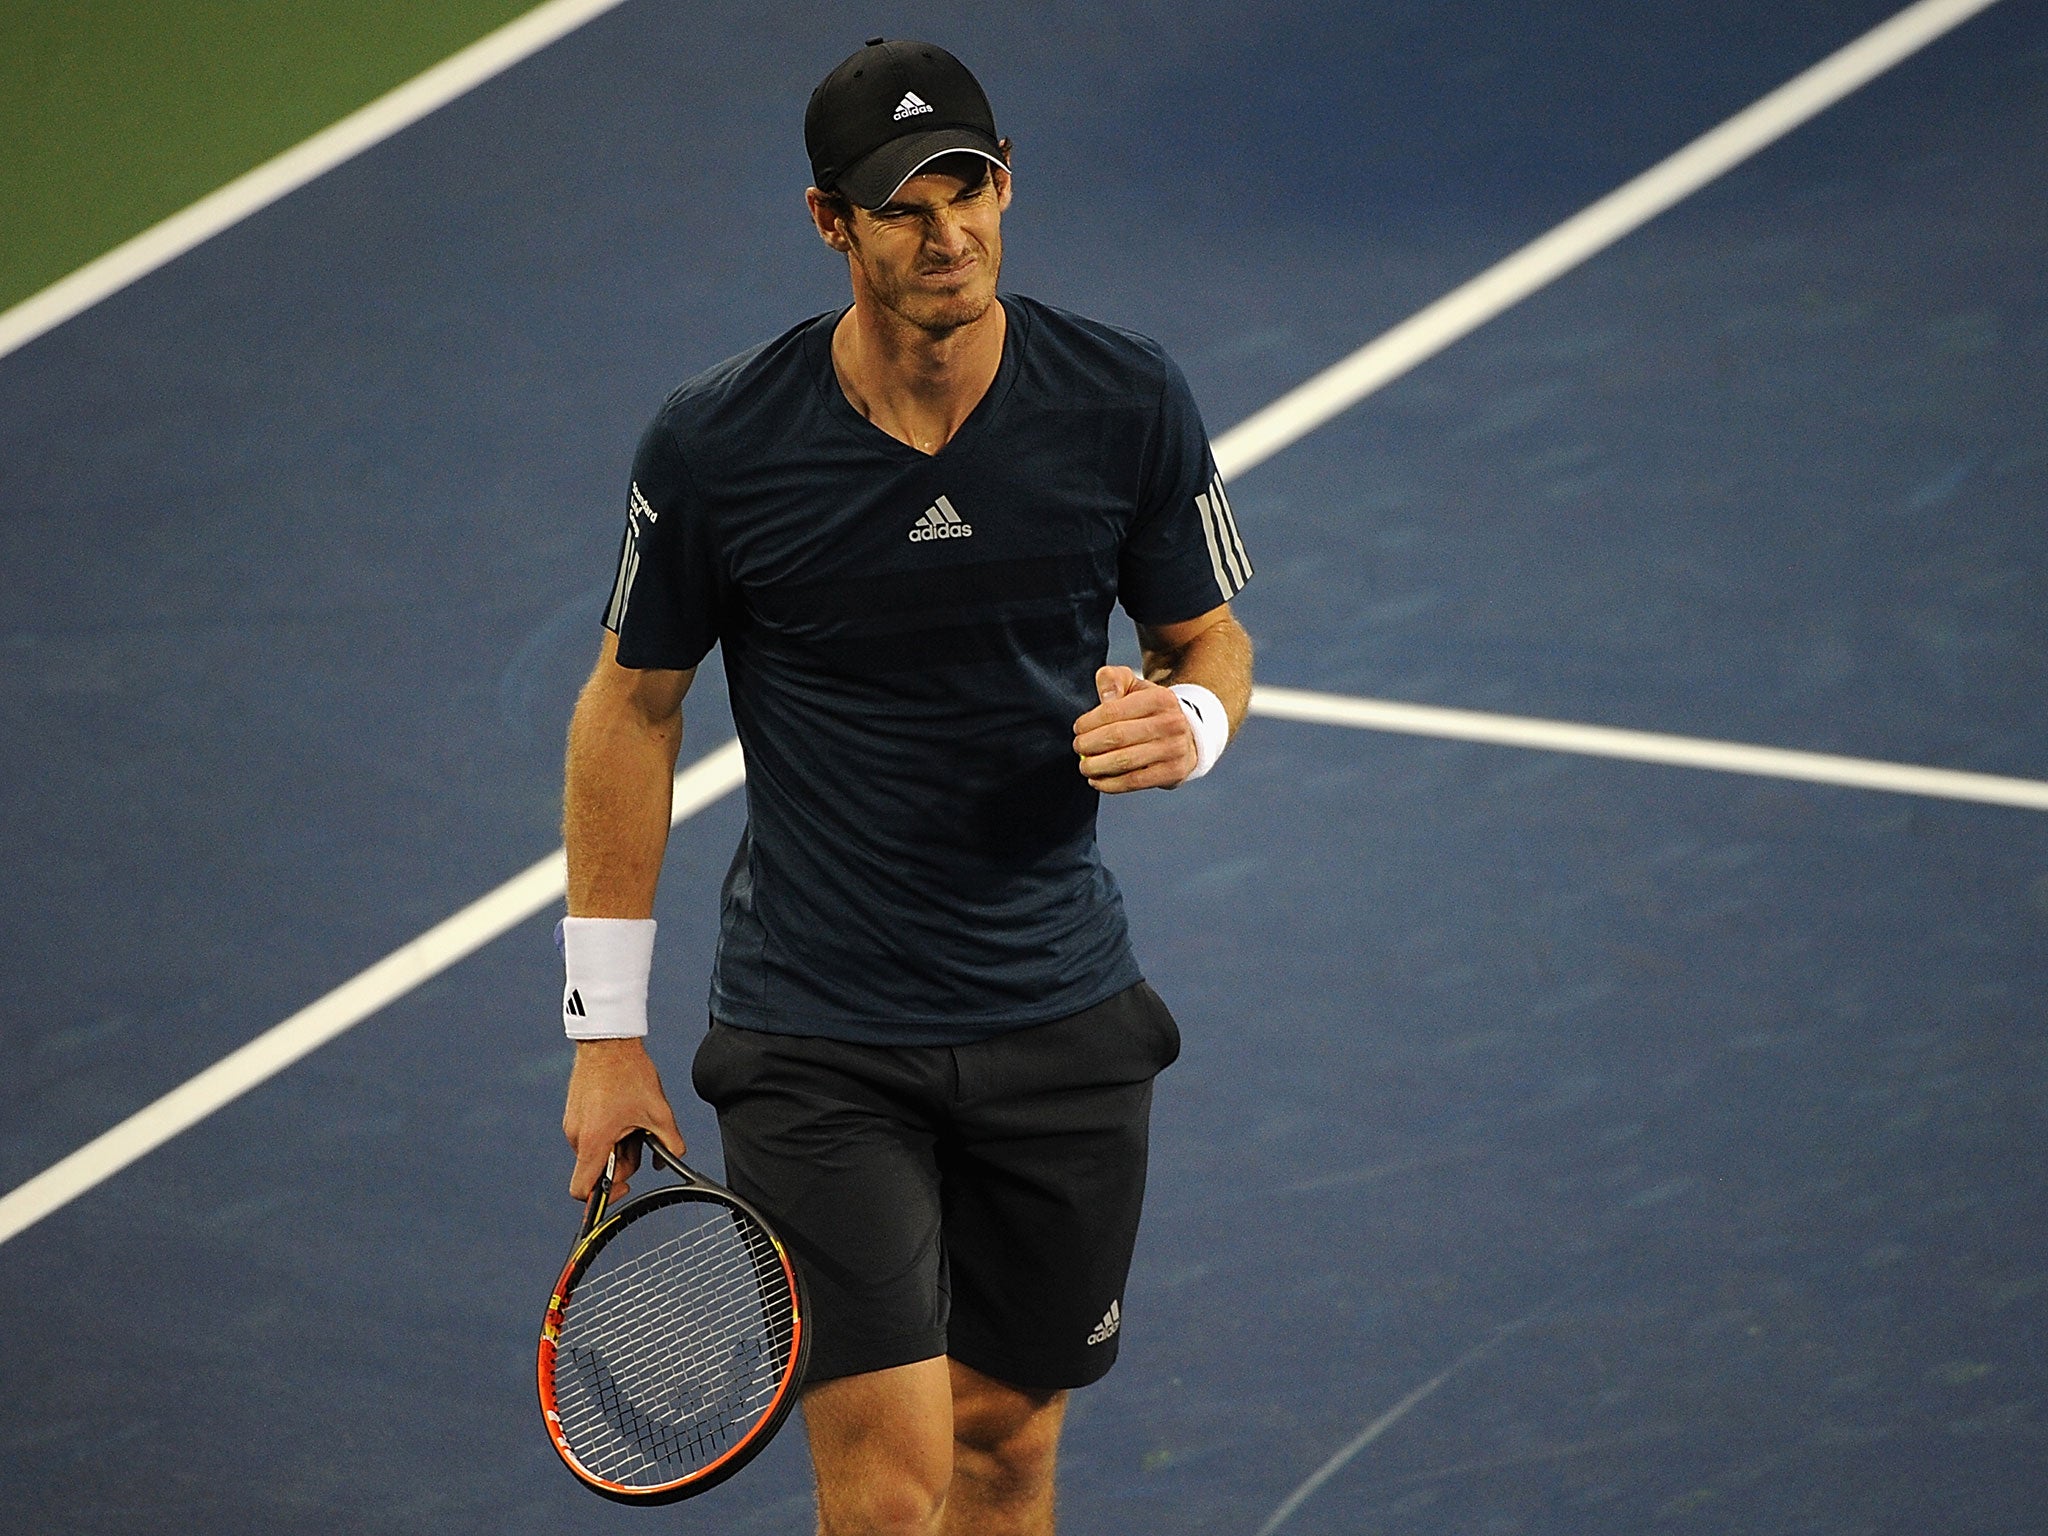 Andy Murray cannot disguise his frustration during his defeat by Roger Federer in Cincinnati last week